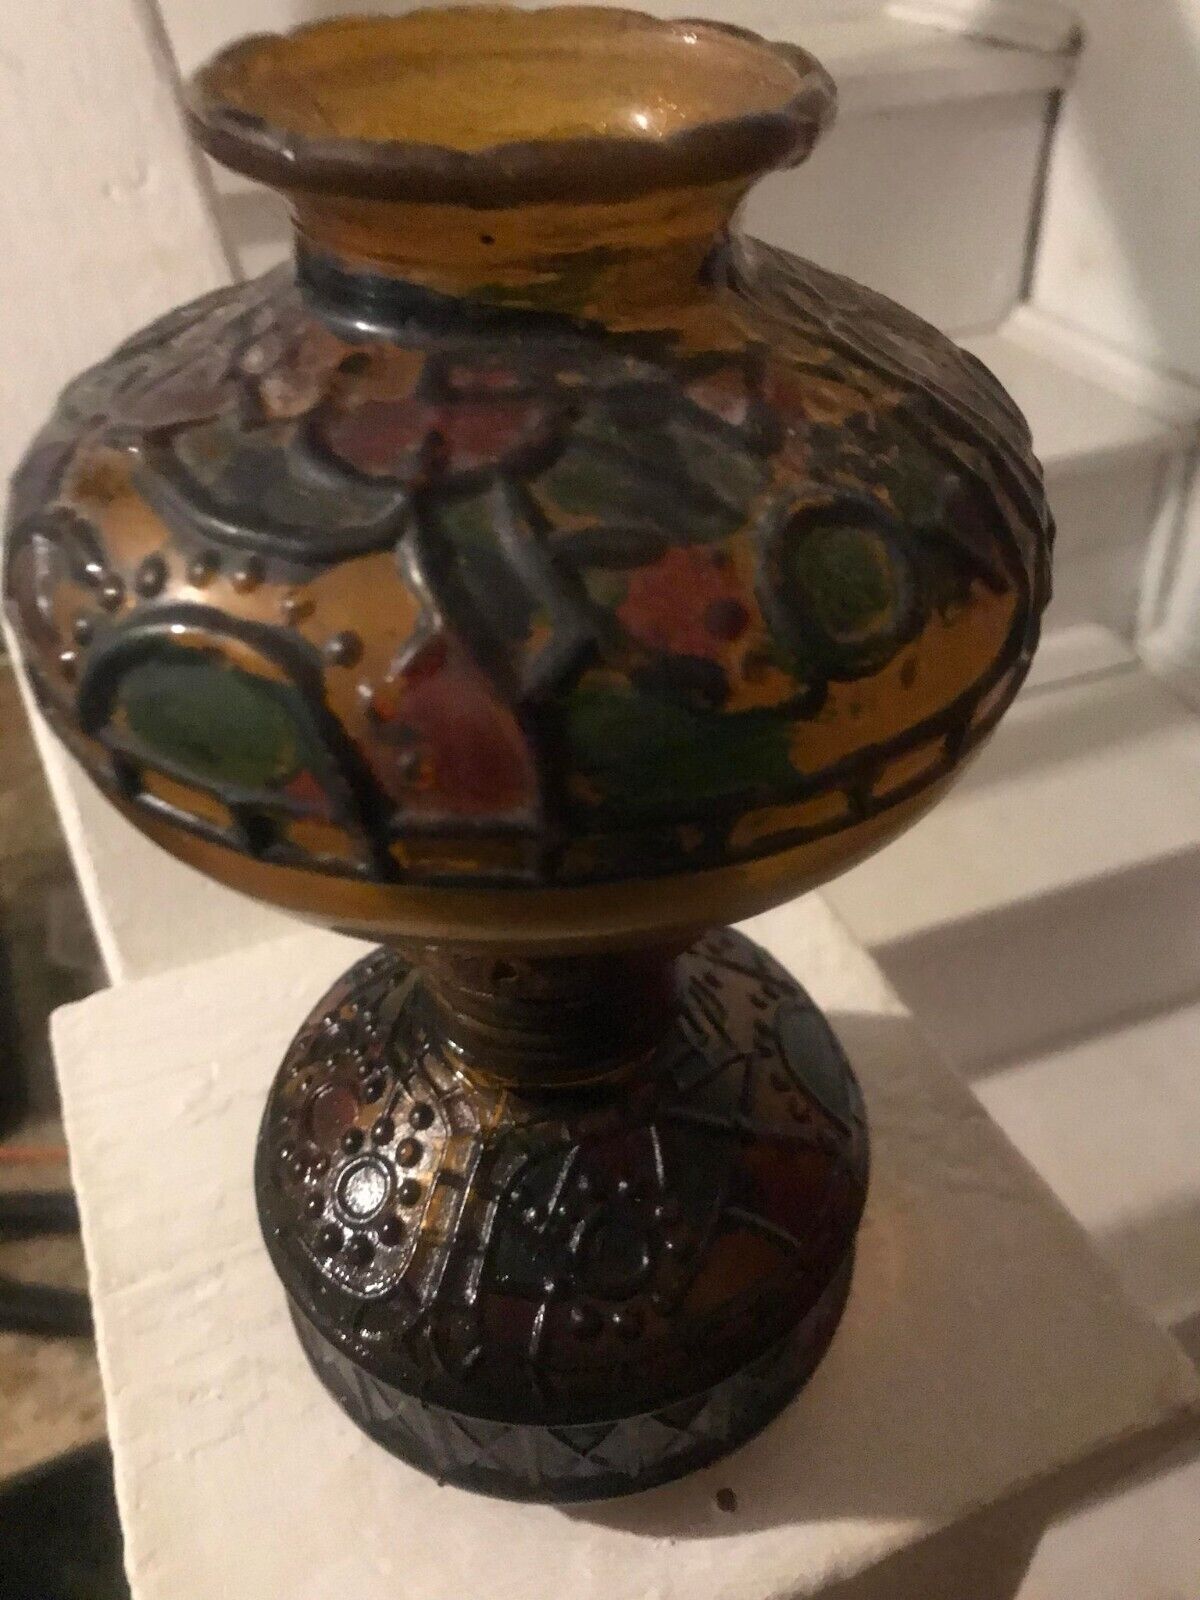 Rare early 1900s or 1800s Tiffany style kersone lamp